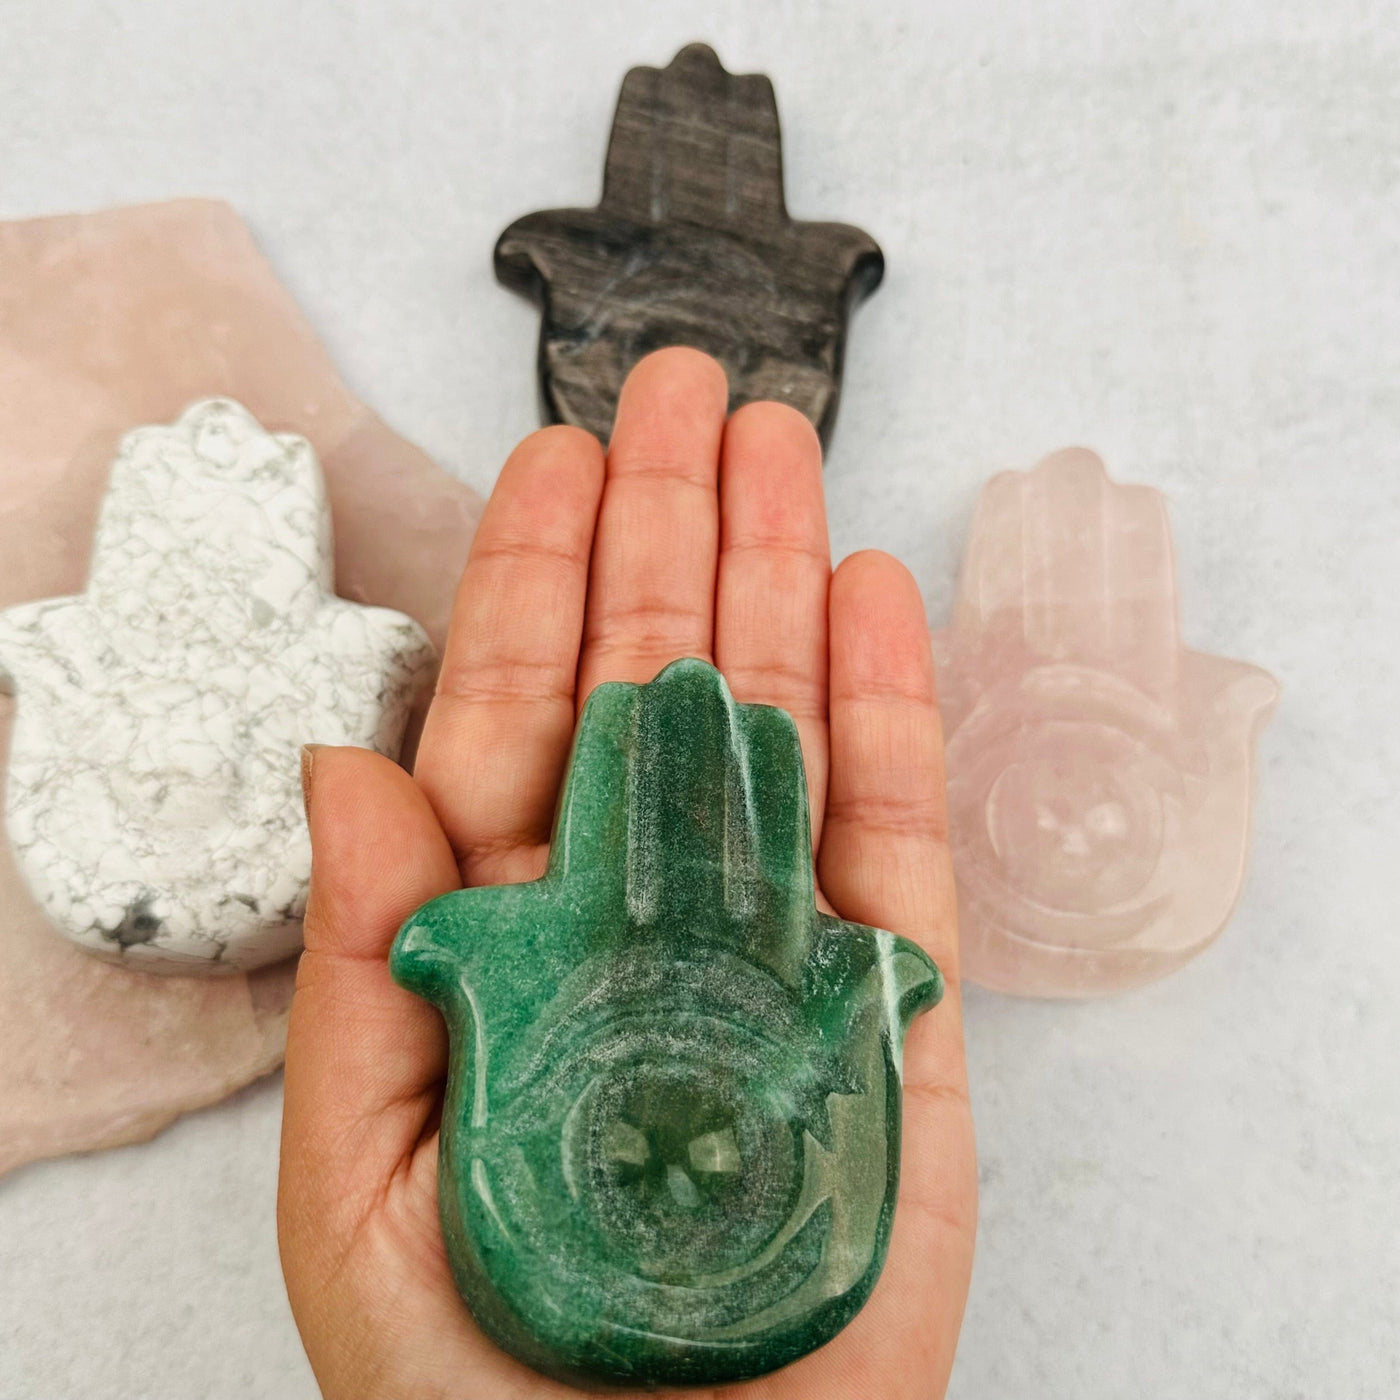 Carved Hamsa Hand Stone with Protective Eye - You Choose Stone